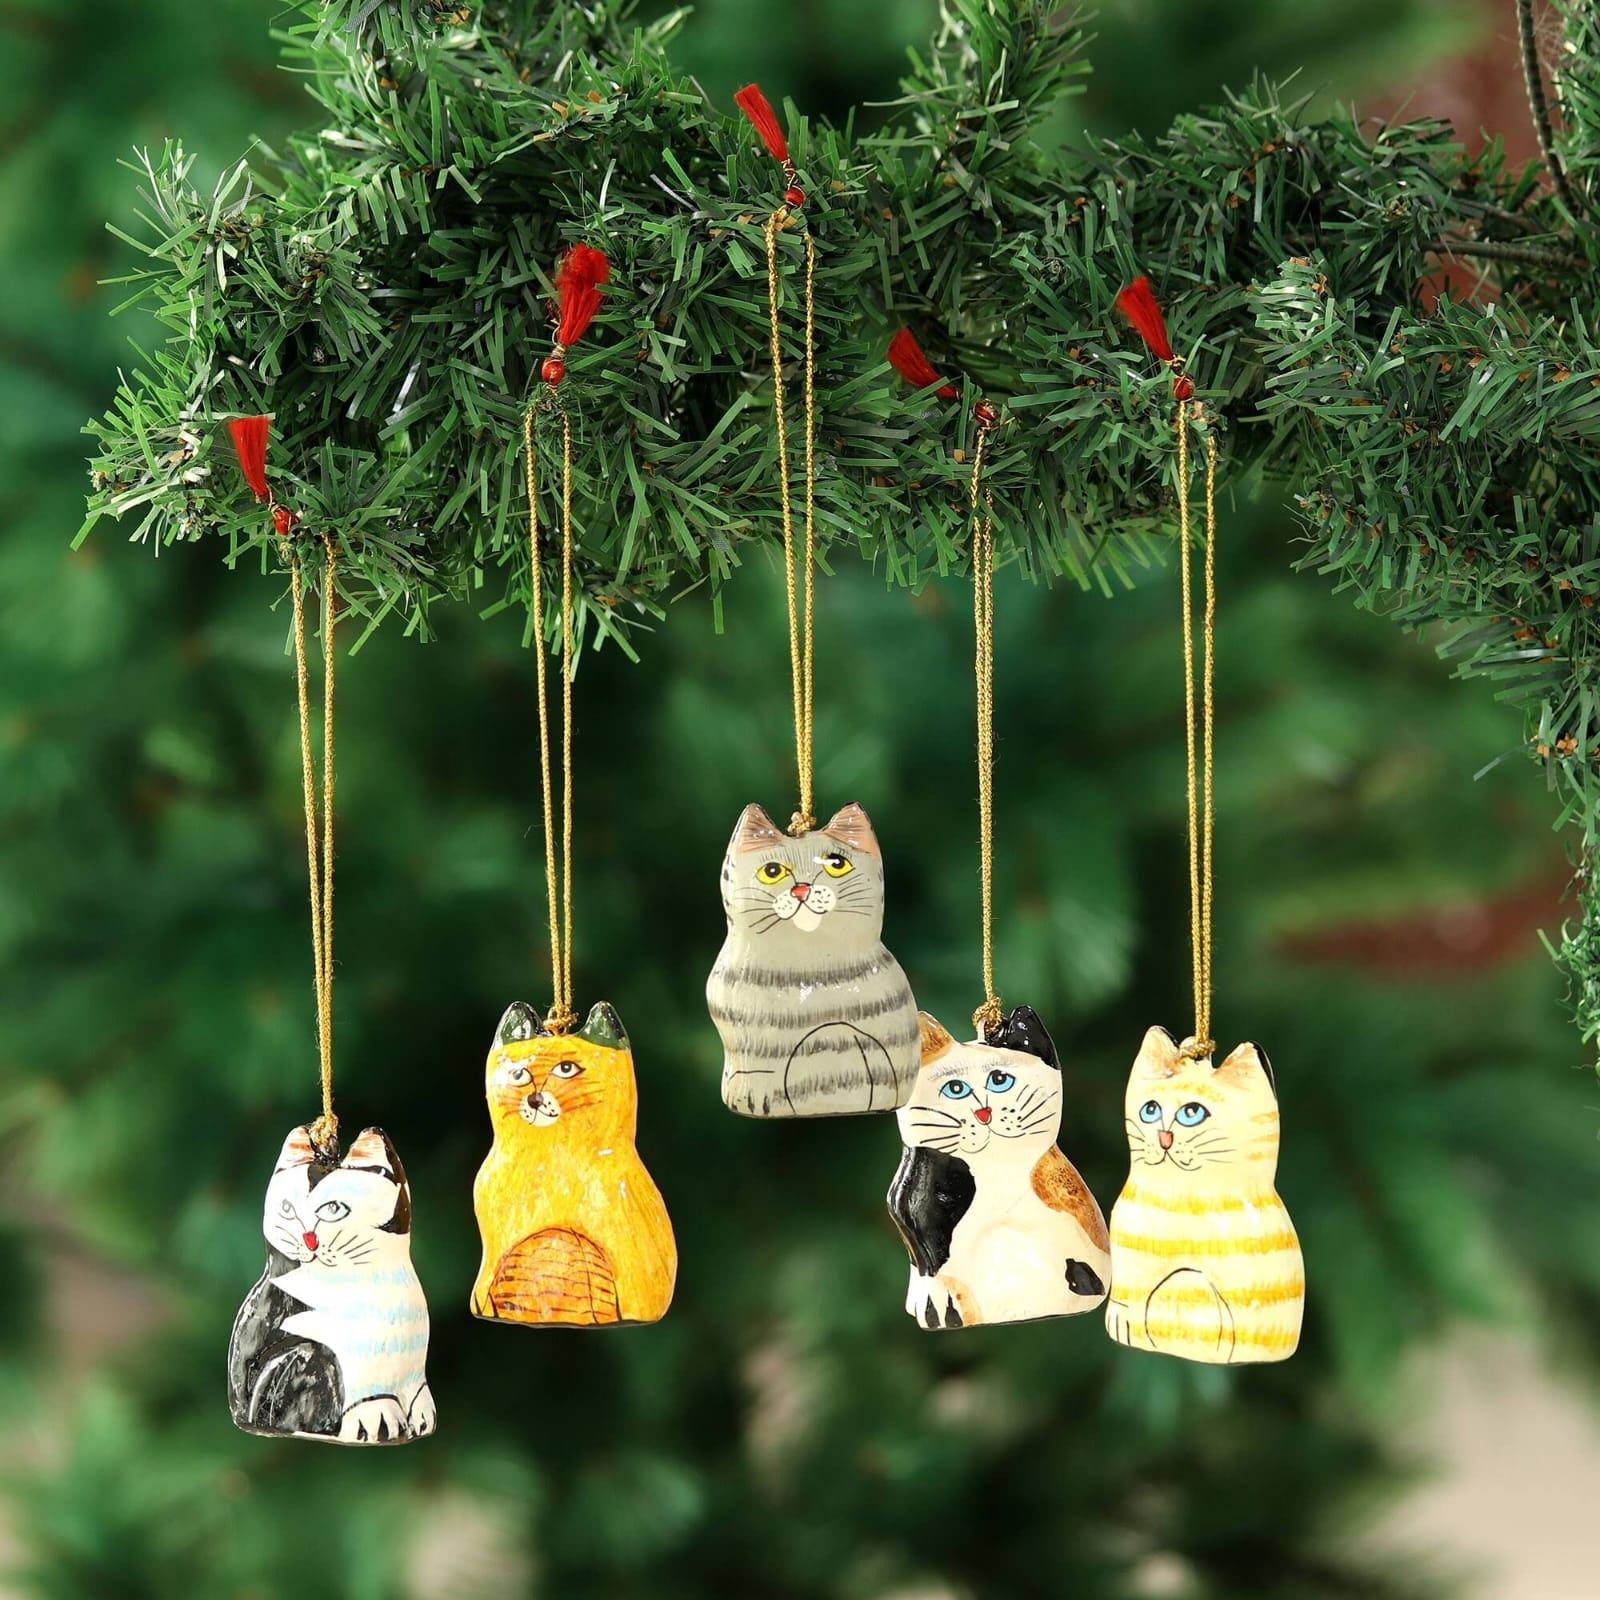 Set of 5 cats,christmas hanging,Christmas tree ornament,christmas bauble,paper mache bauble,hanging cat ornament,PaperMache animal sculpture